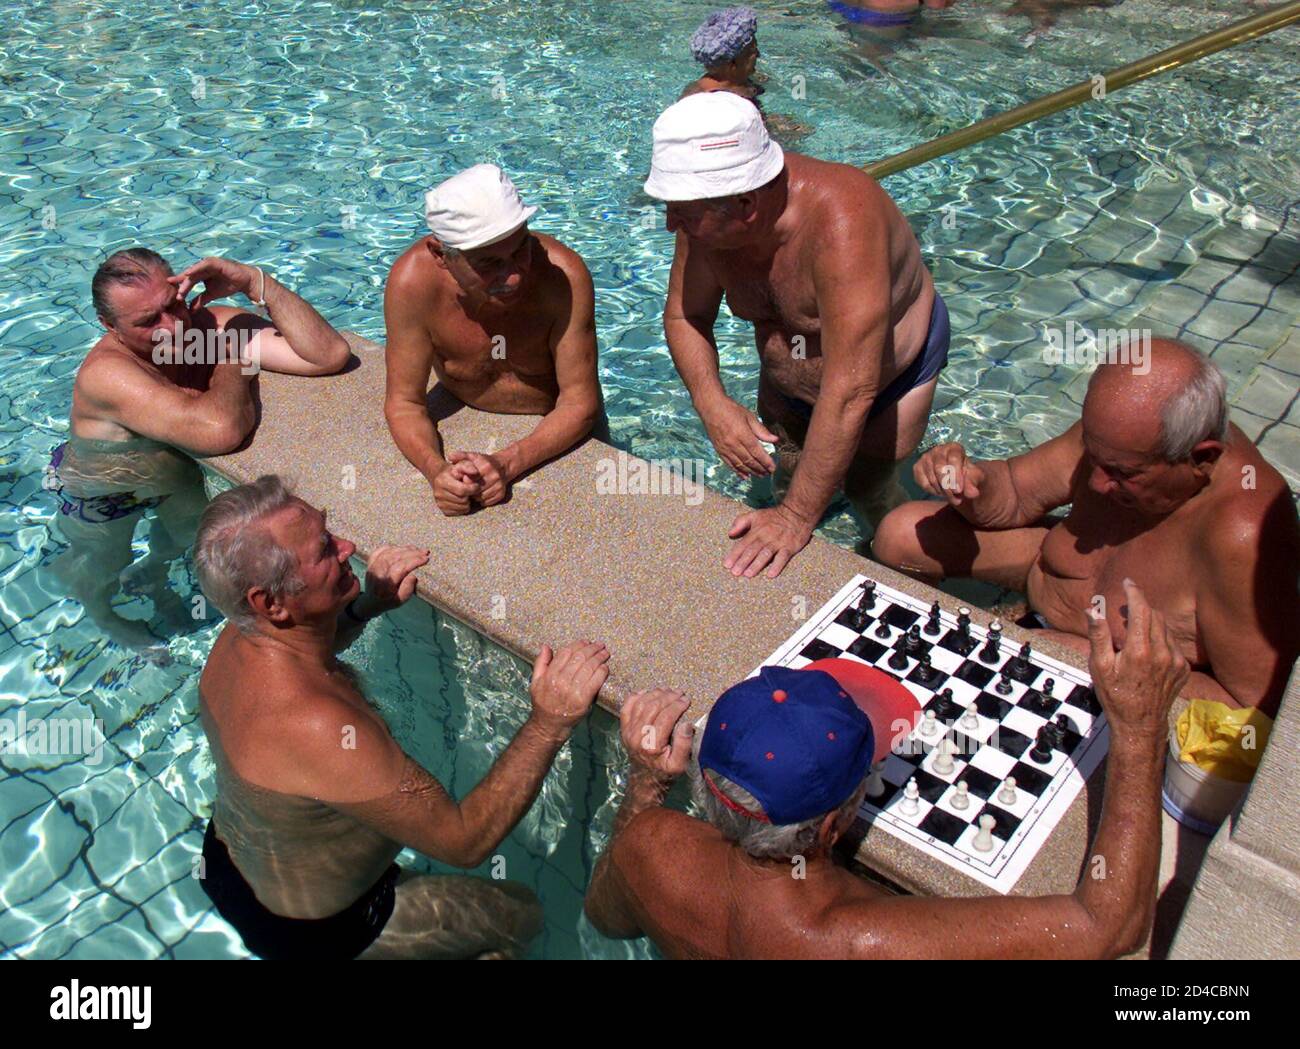 Hungarians play chess as they cool off at Budapest's 19th century Szechenyi bath and spa on June 14, 2002. Temperatures in Budapest, the European capital with the most spas, are expected to reach 40C this weekend. REUTERS/Laszlo Balogh  LB Stock Photo